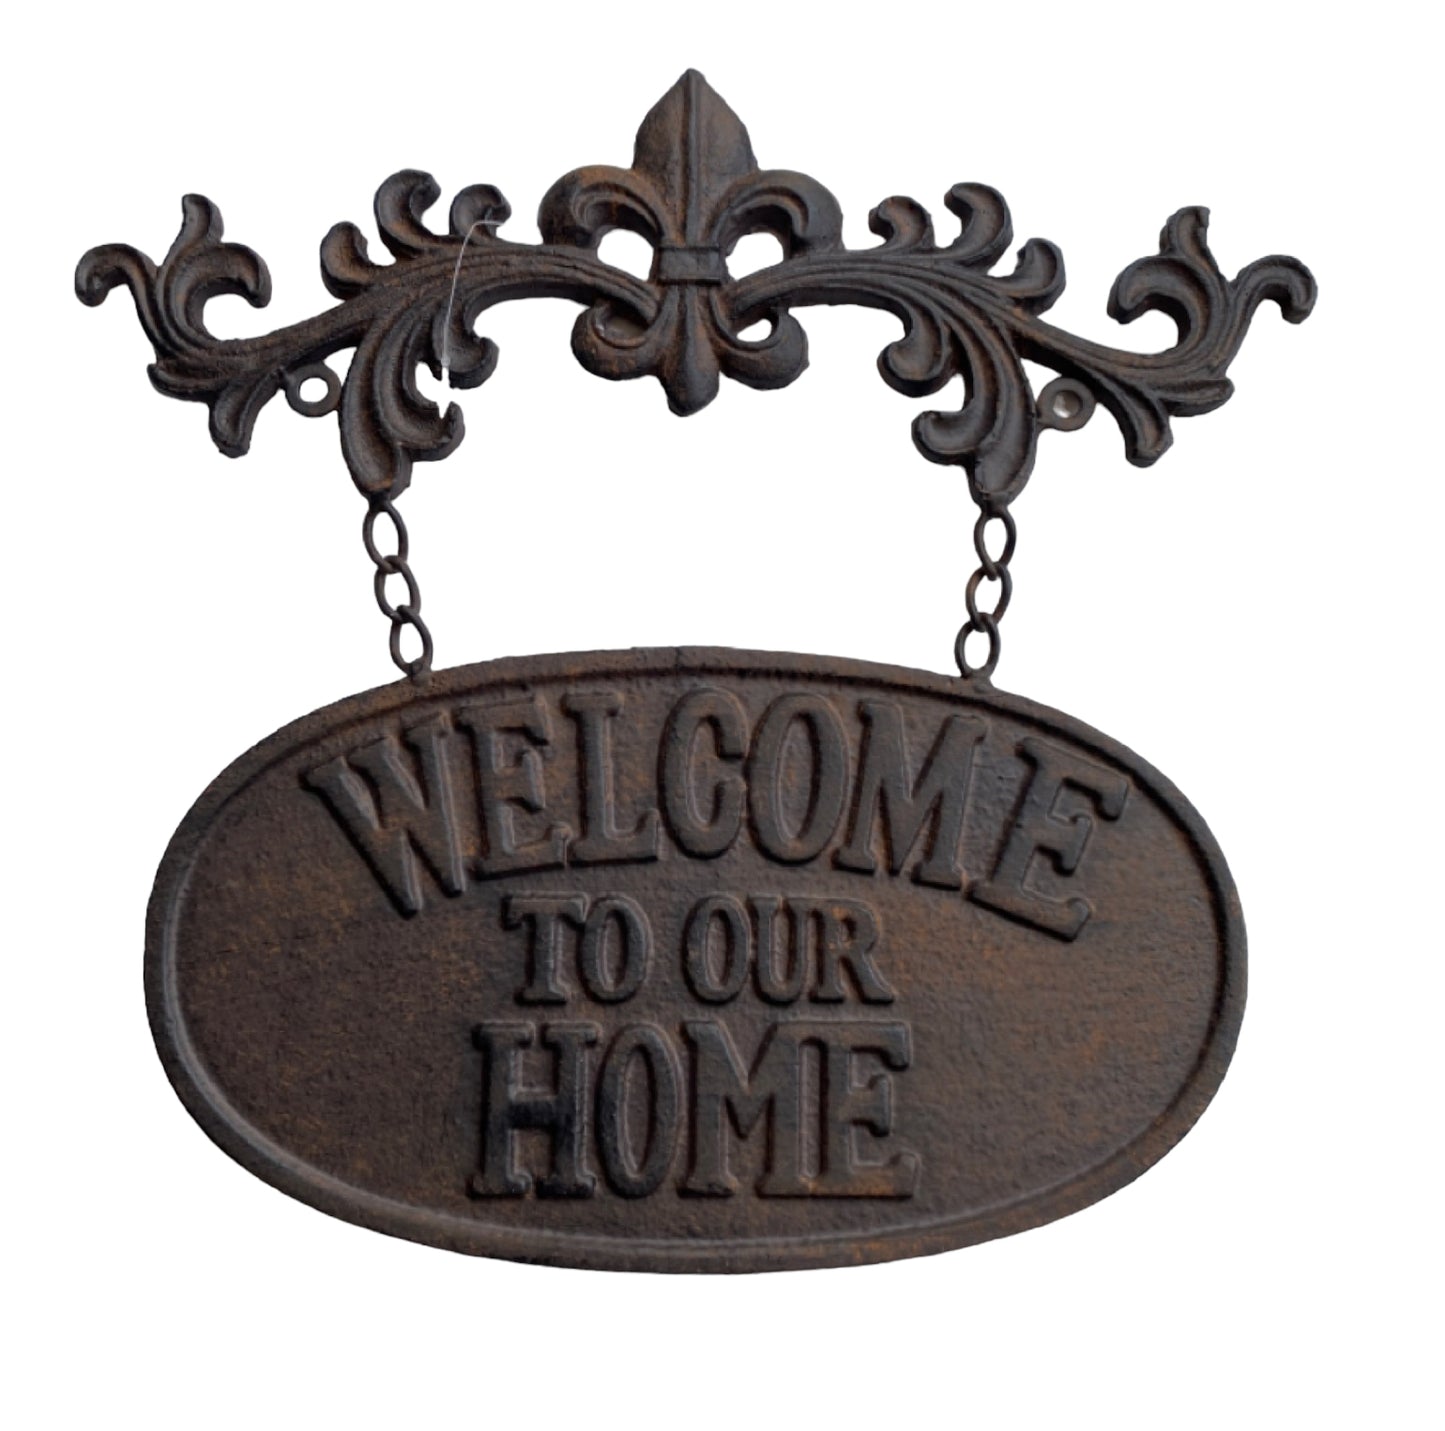 Welcome To Our Home Iron Decorative Fleur Sign - The Renmy Store Homewares & Gifts 